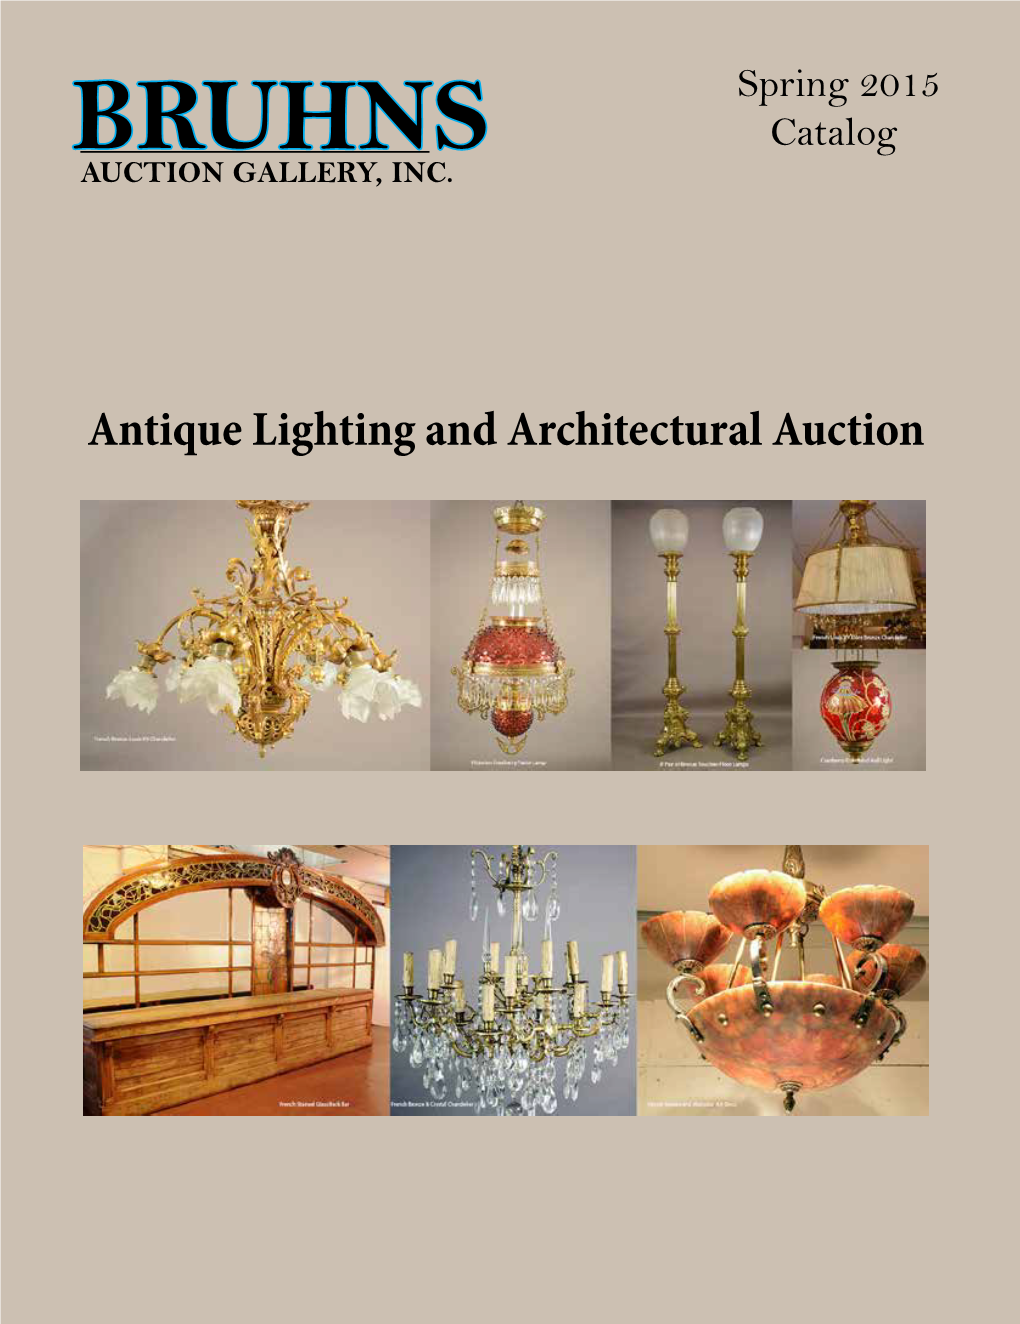 Bruhns Auction Gallery